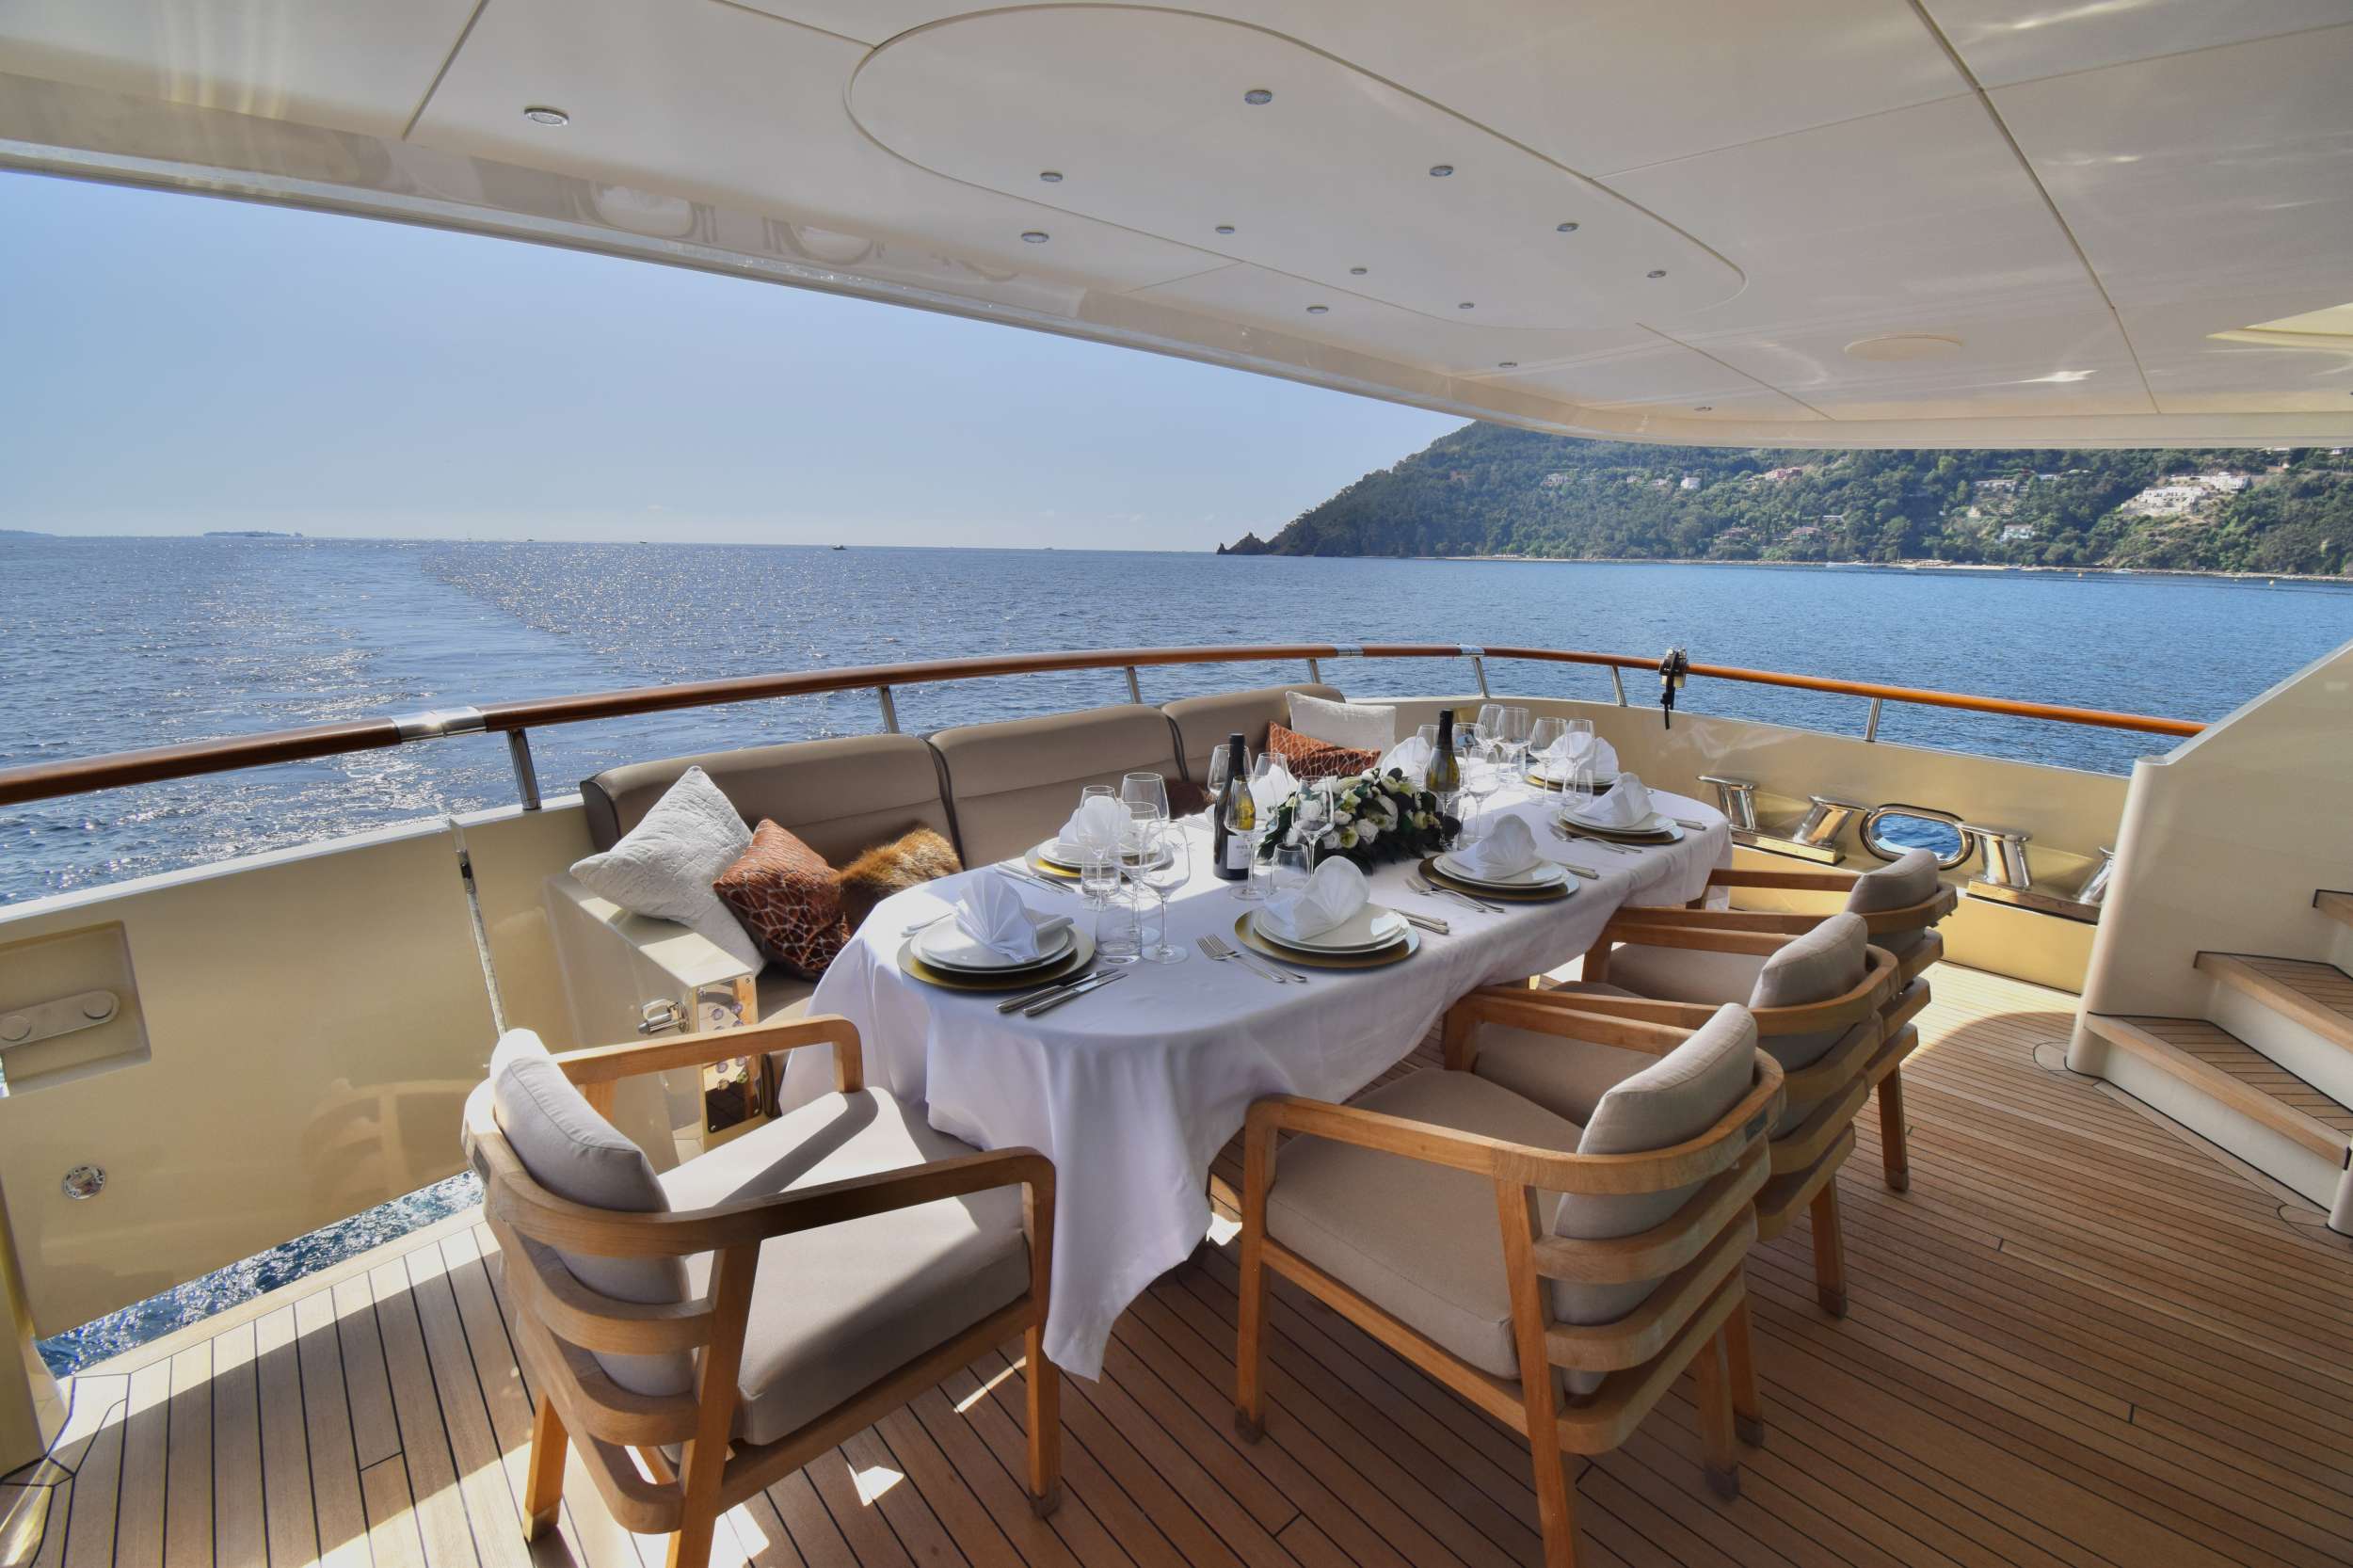 ORIZZONTE - Yacht Charter Radovici & Boat hire in W. Med -Naples/Sicily, W. Med -Riviera/Cors/Sard., W. Med - Spain/Balearics 3